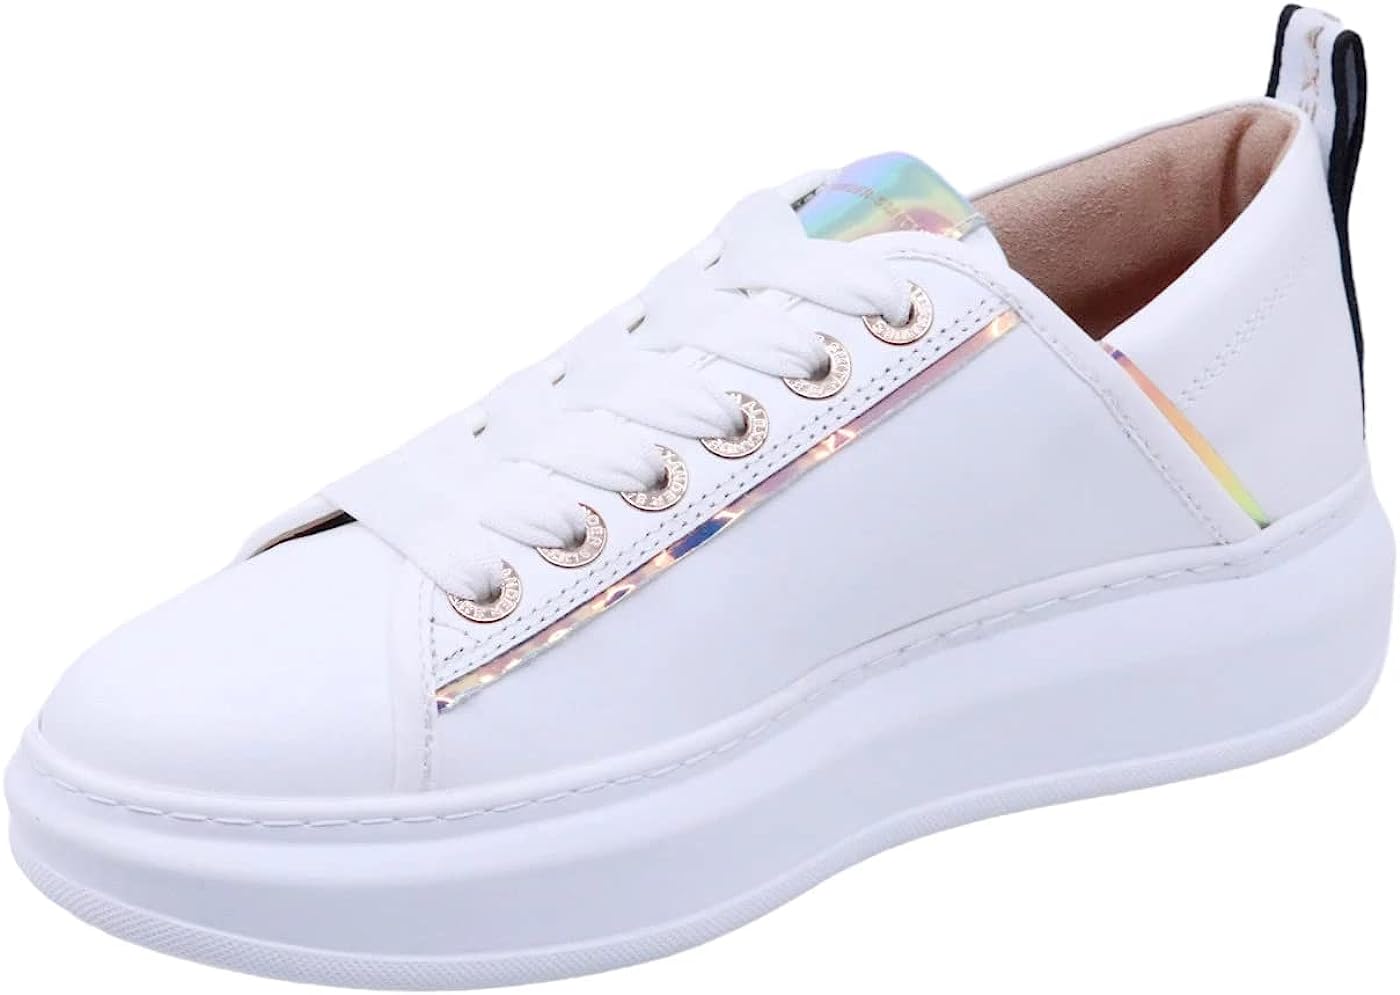 Sneakers Alexander Smith Donna Bianco/multi